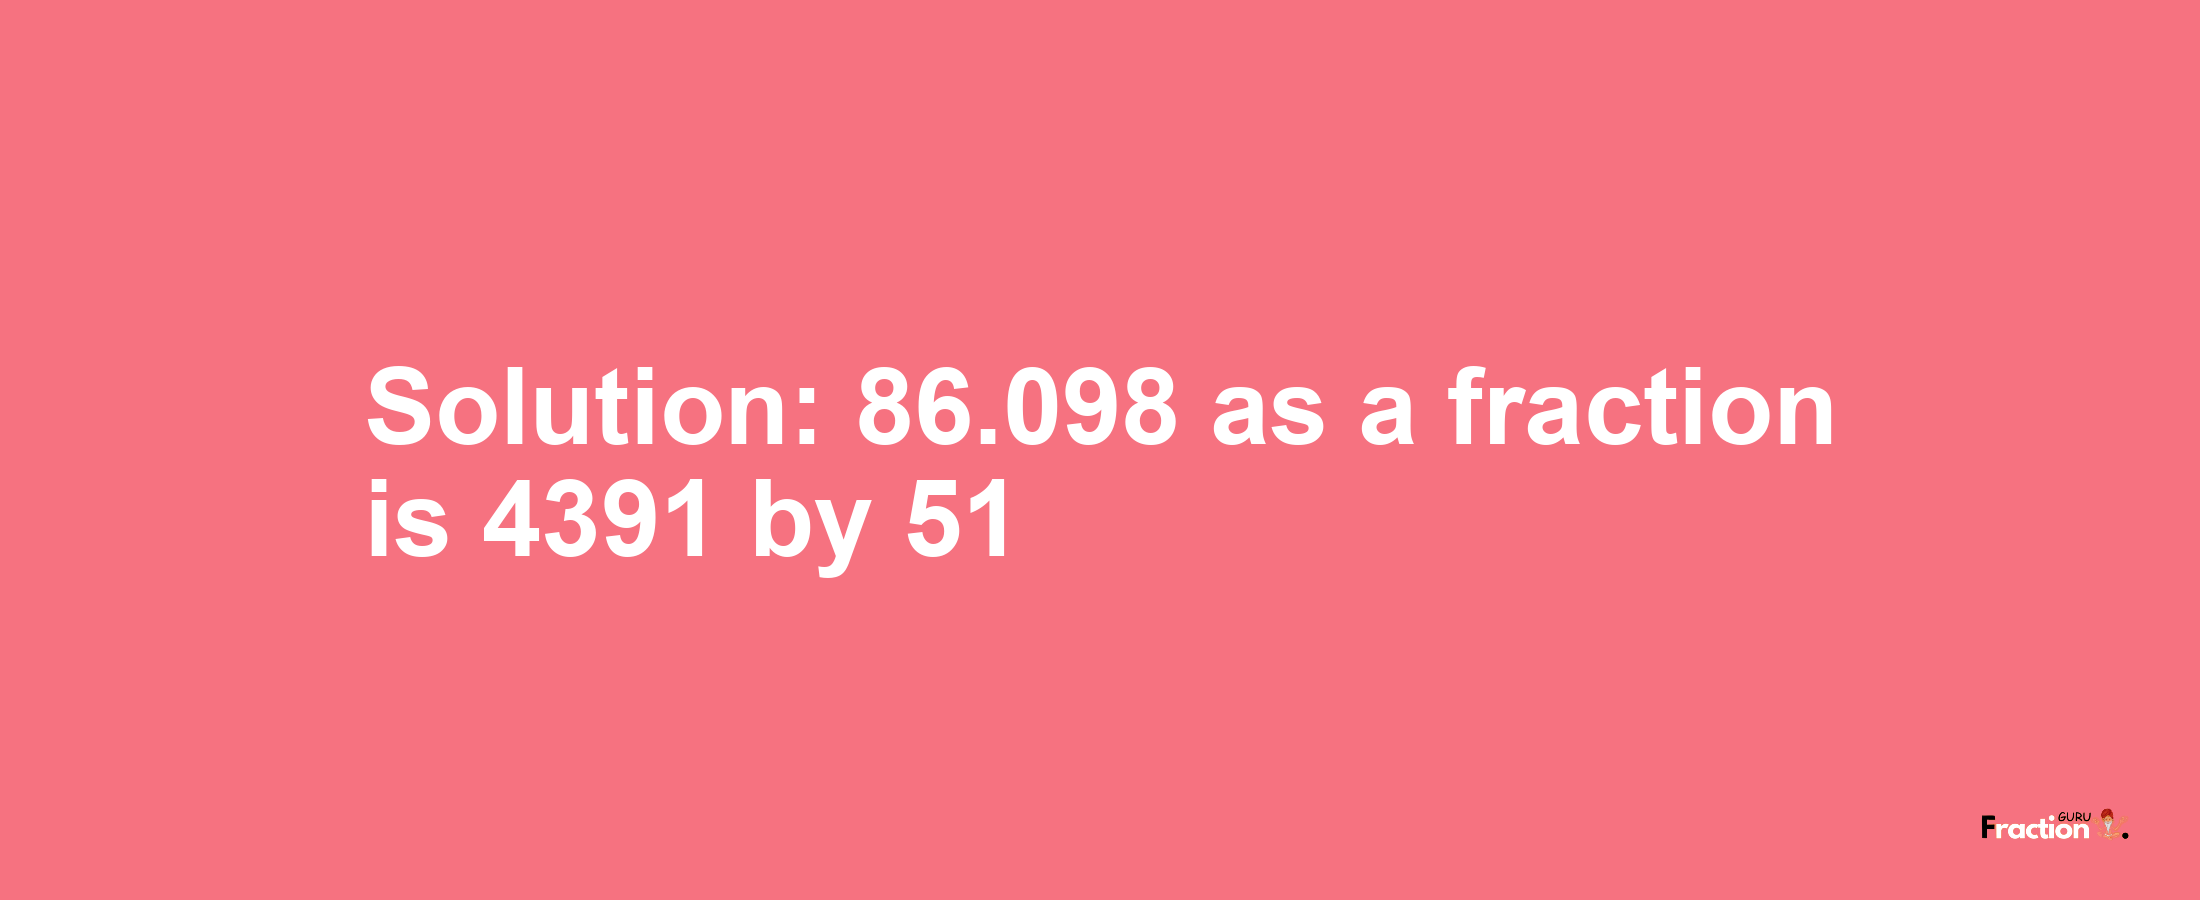 Solution:86.098 as a fraction is 4391/51